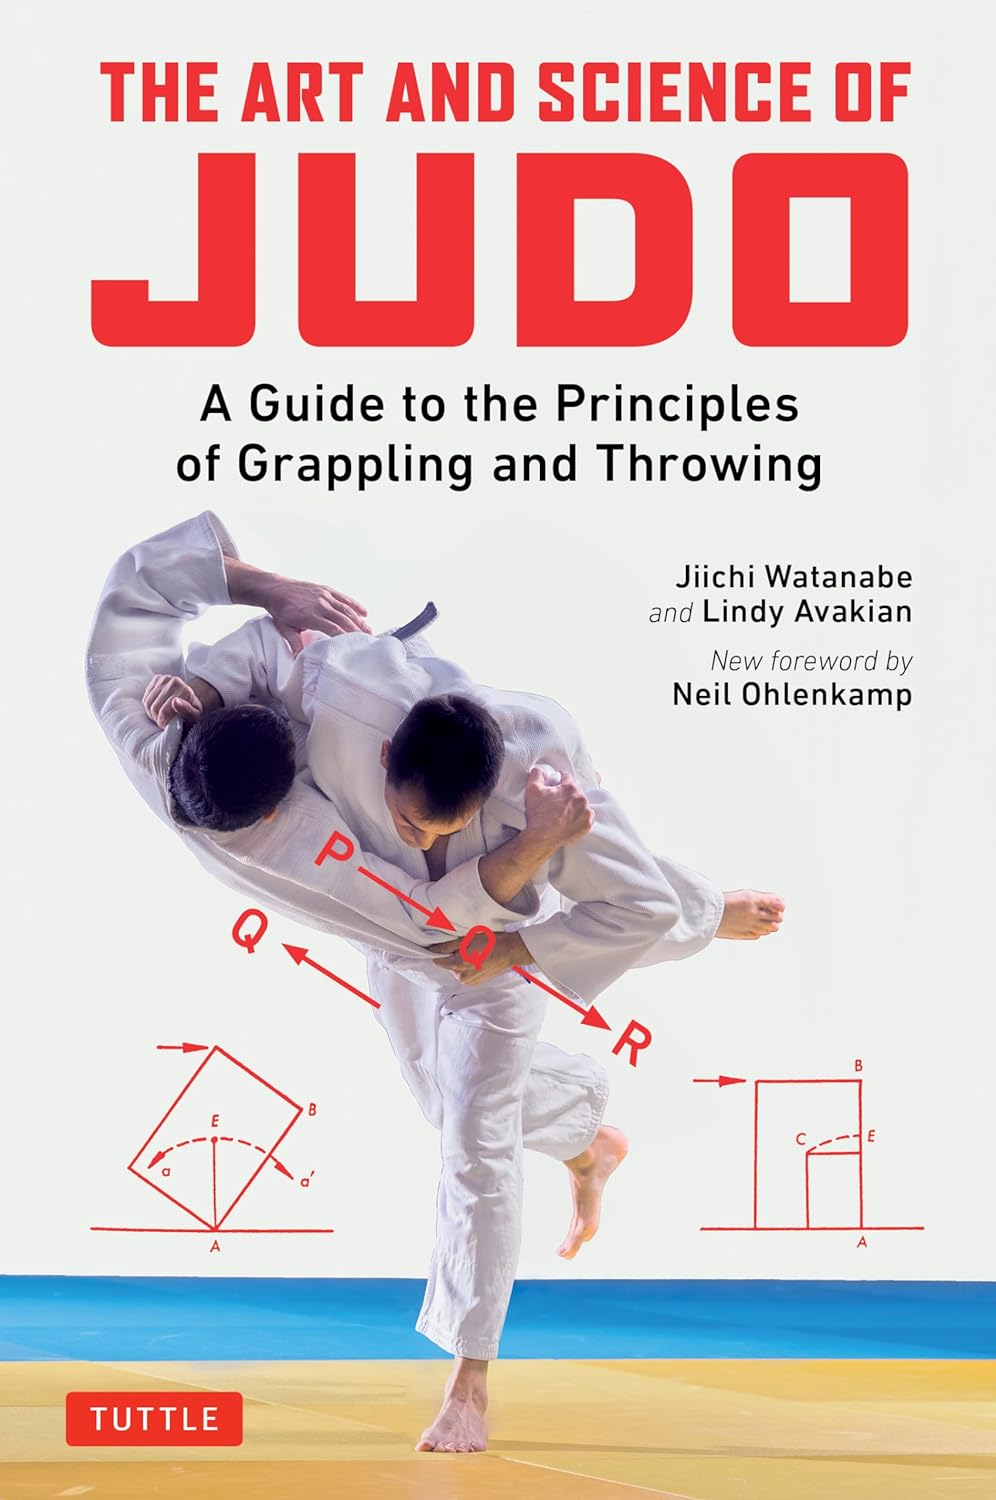 The Art and Science of Judo: A Guide to the Principles of Grappling and Throwing Book by Jiichi Watanabe